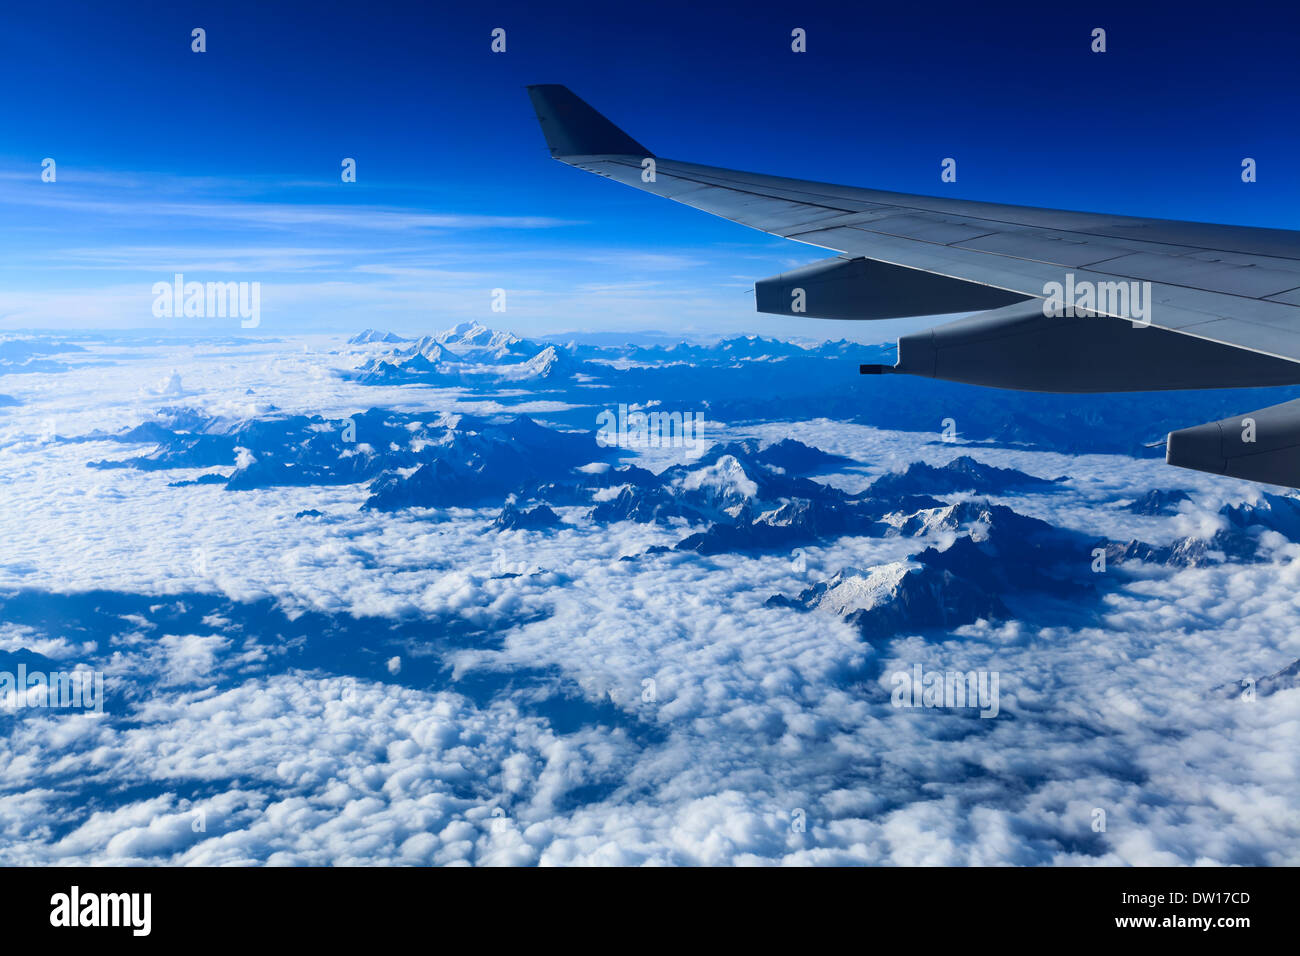 aircraft wing on the himalayas Stock Photo